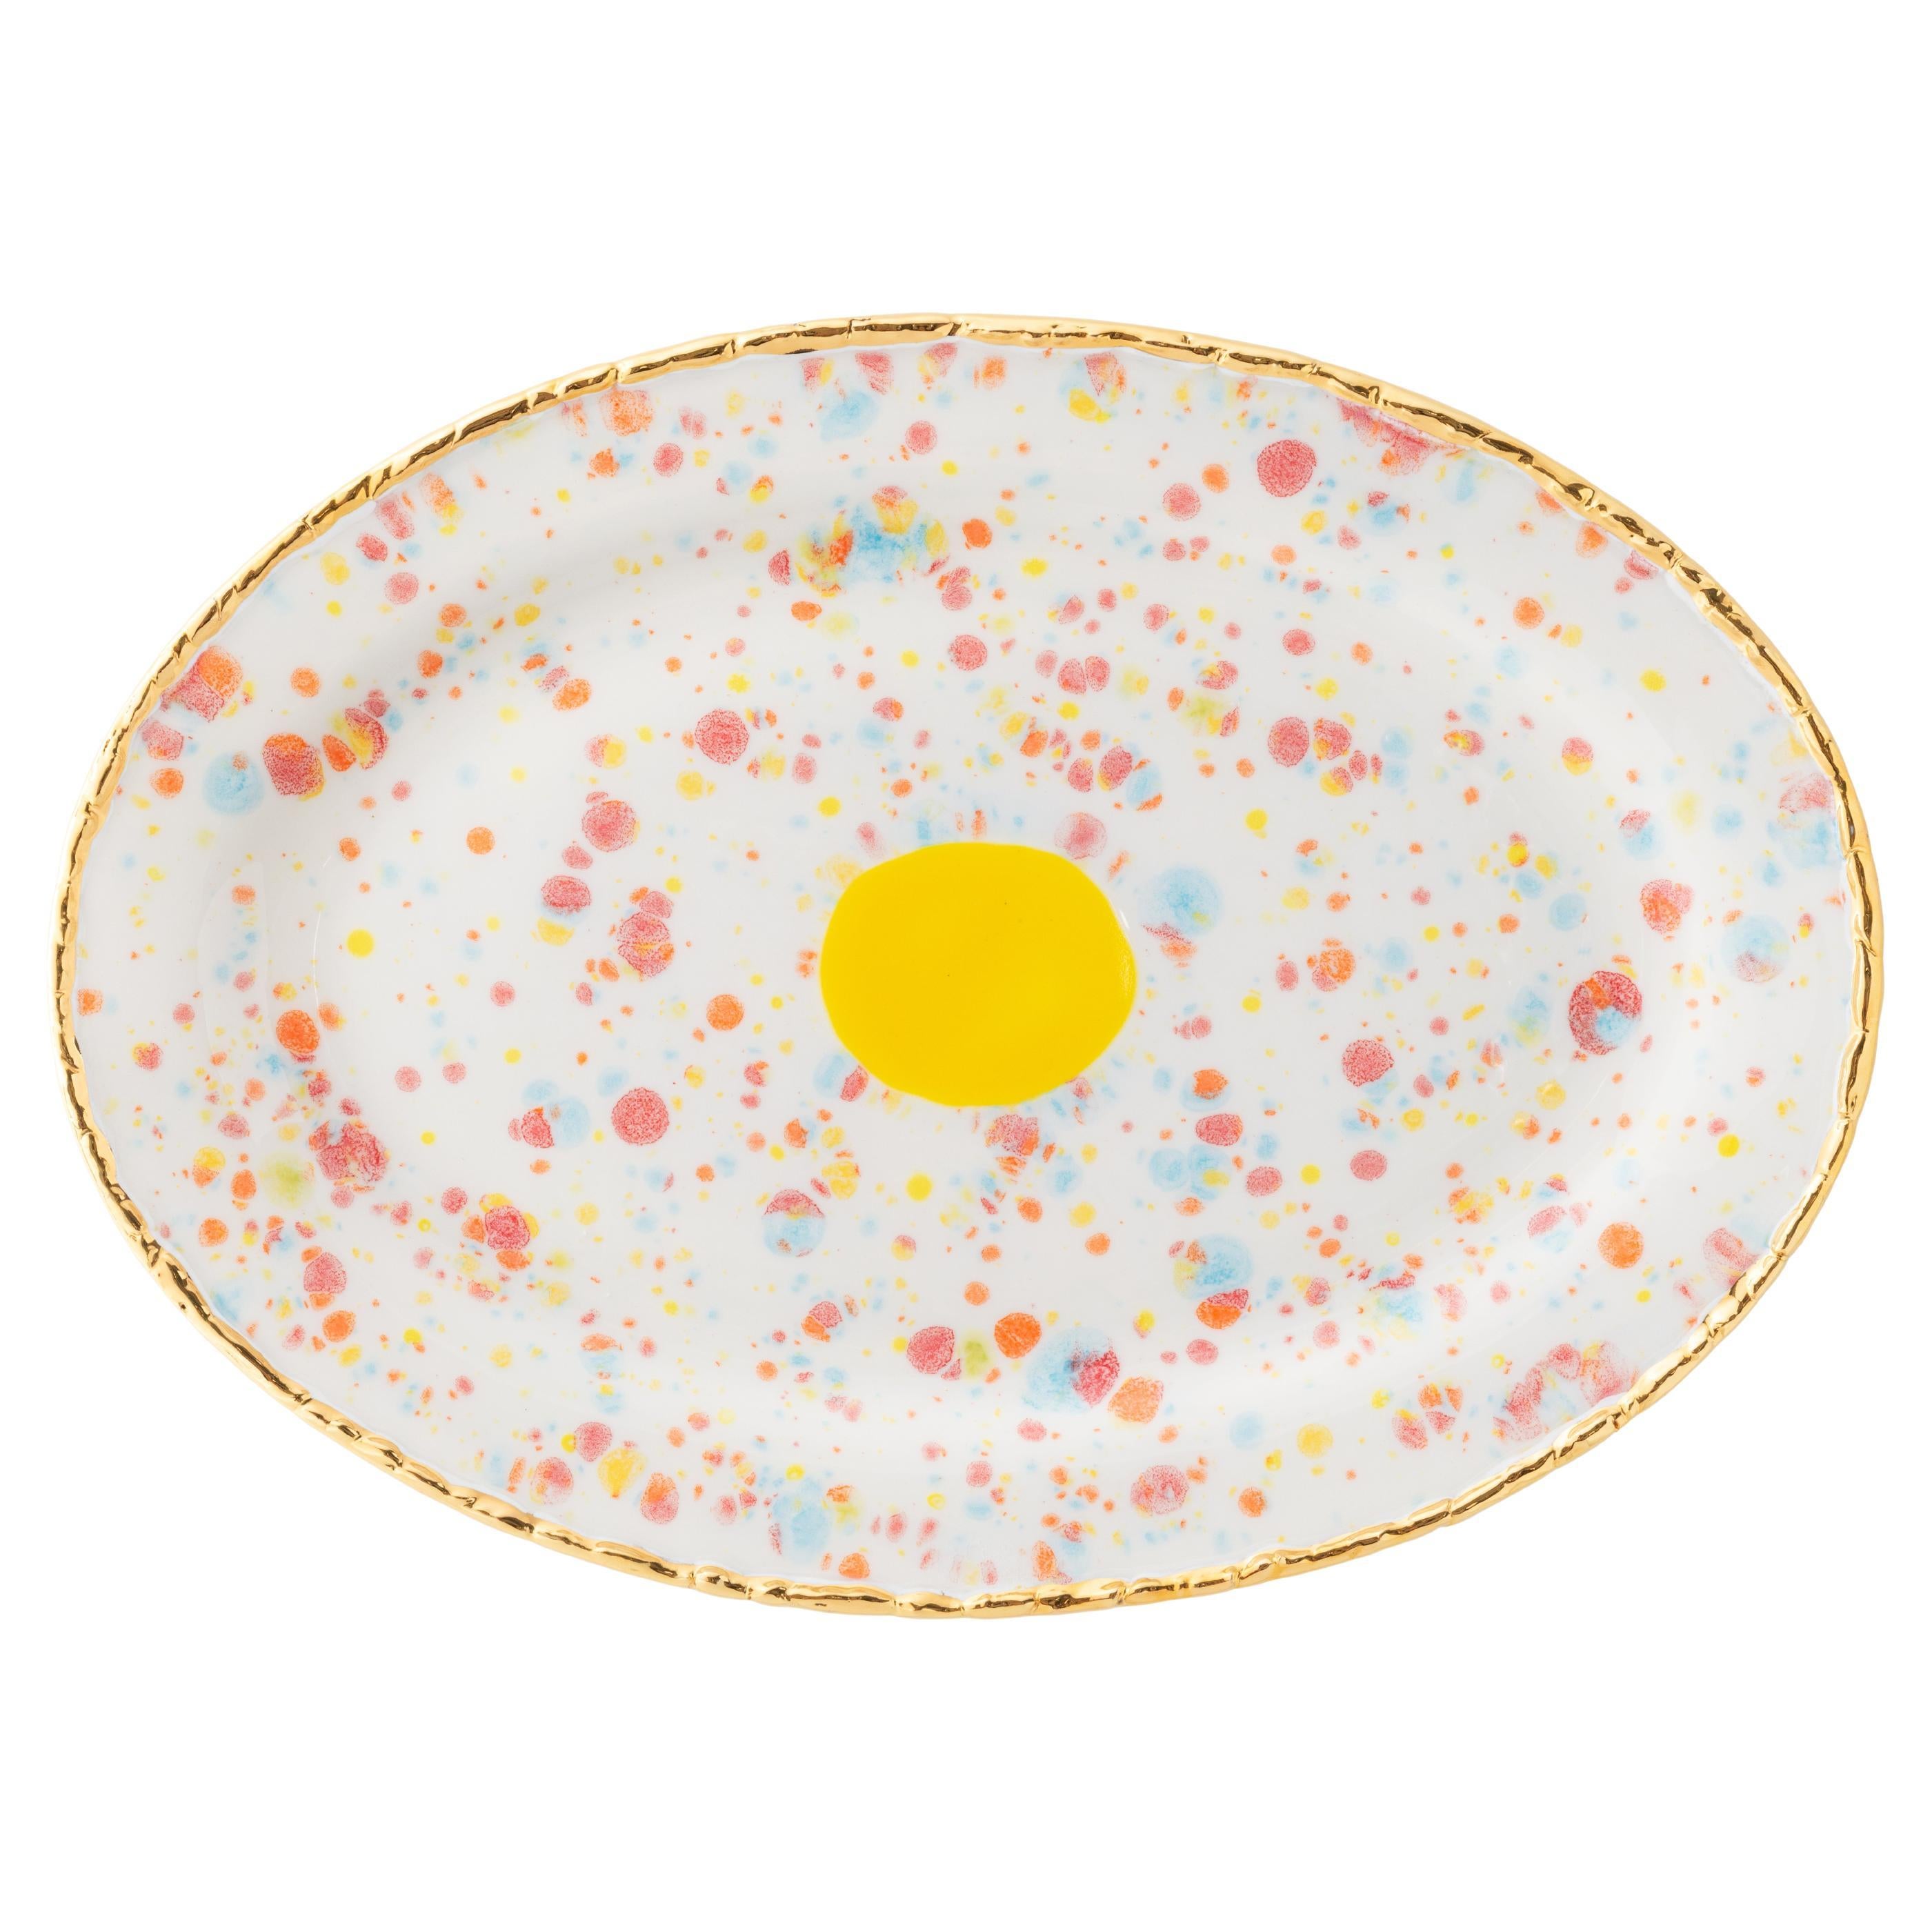 Contemporary Oval Rim Platter Gold Hand Painted Porcelain Tableware For Sale